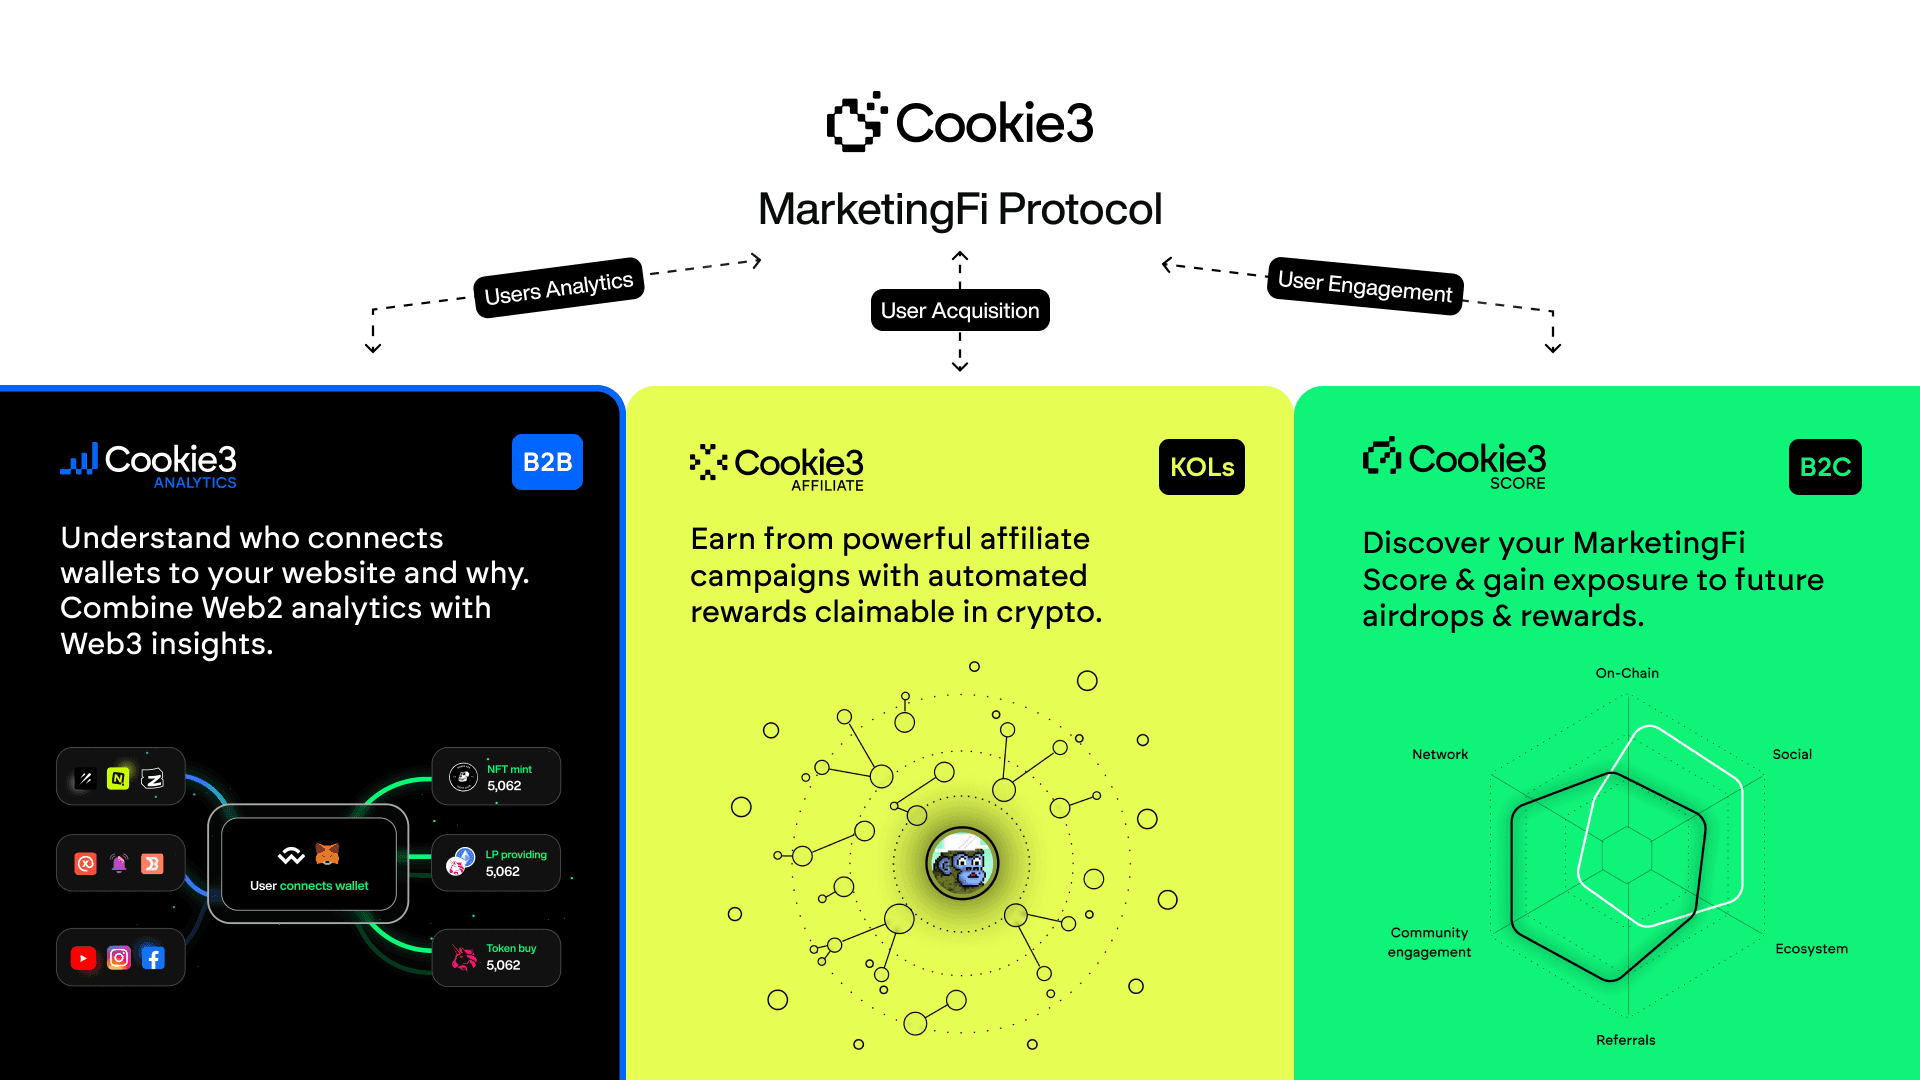 $COOKIE Image #2